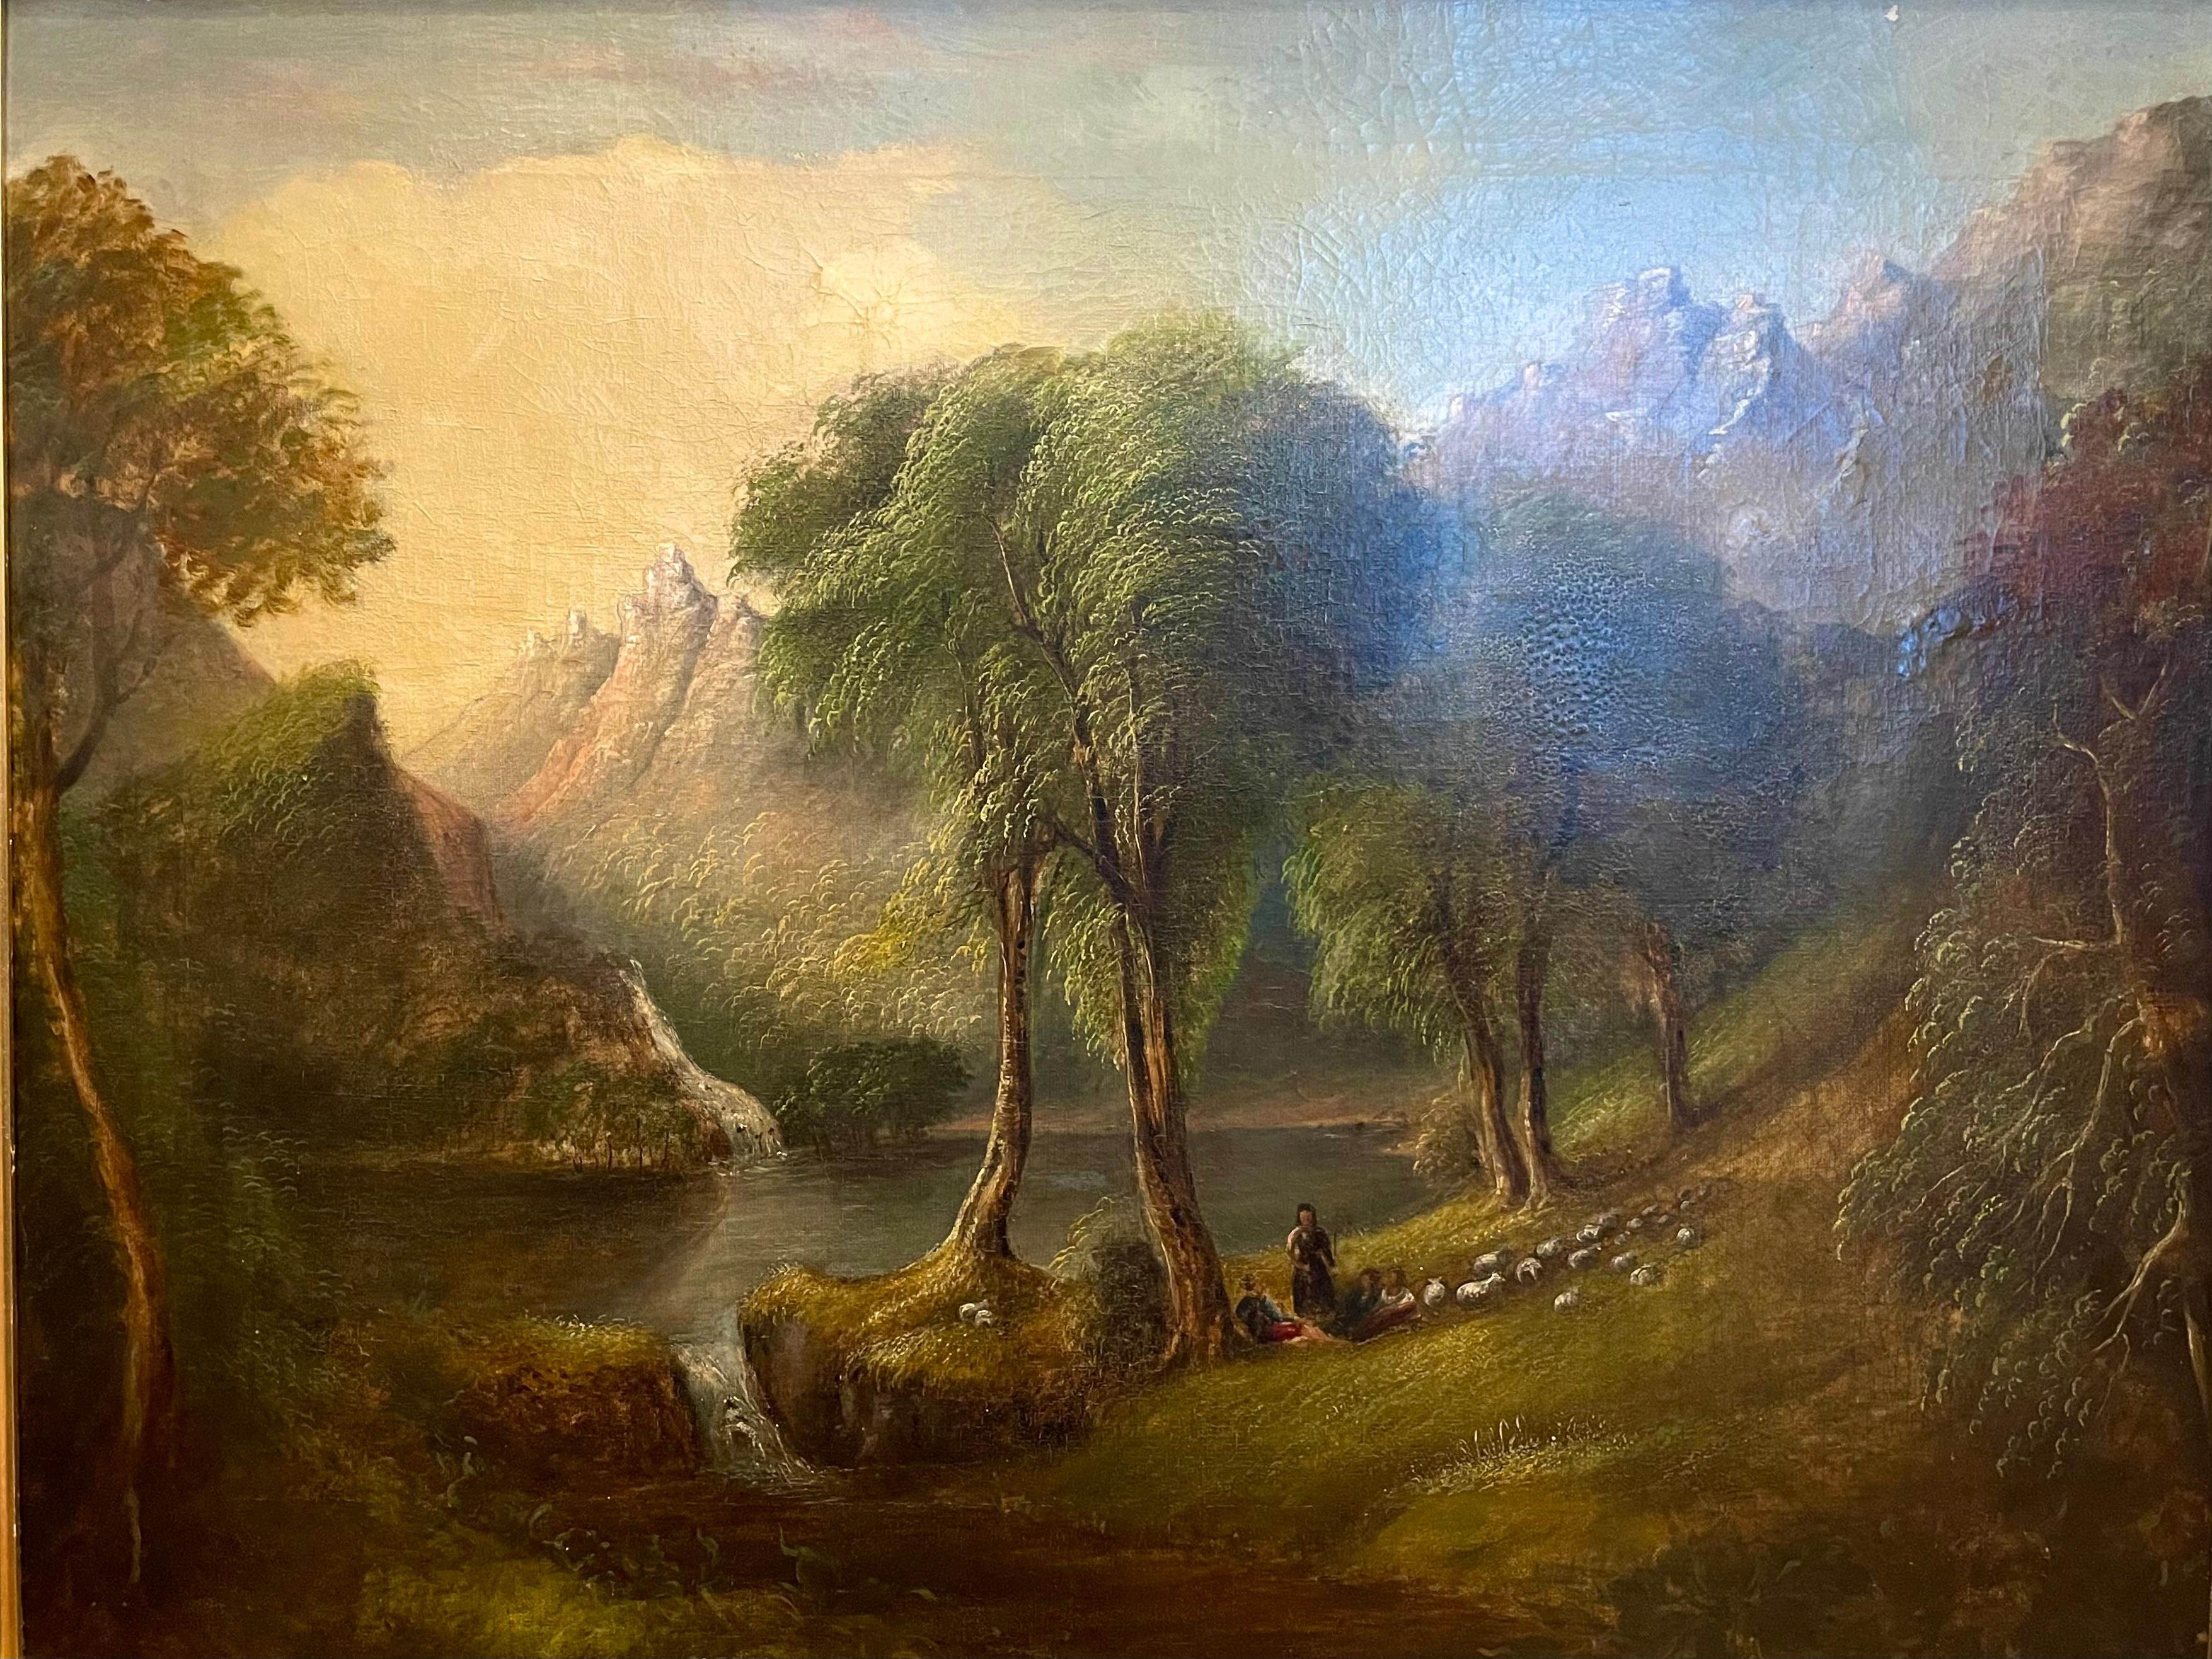 Golden tree with mountain and stream, flock of sheep - Painting by Samuel Bough